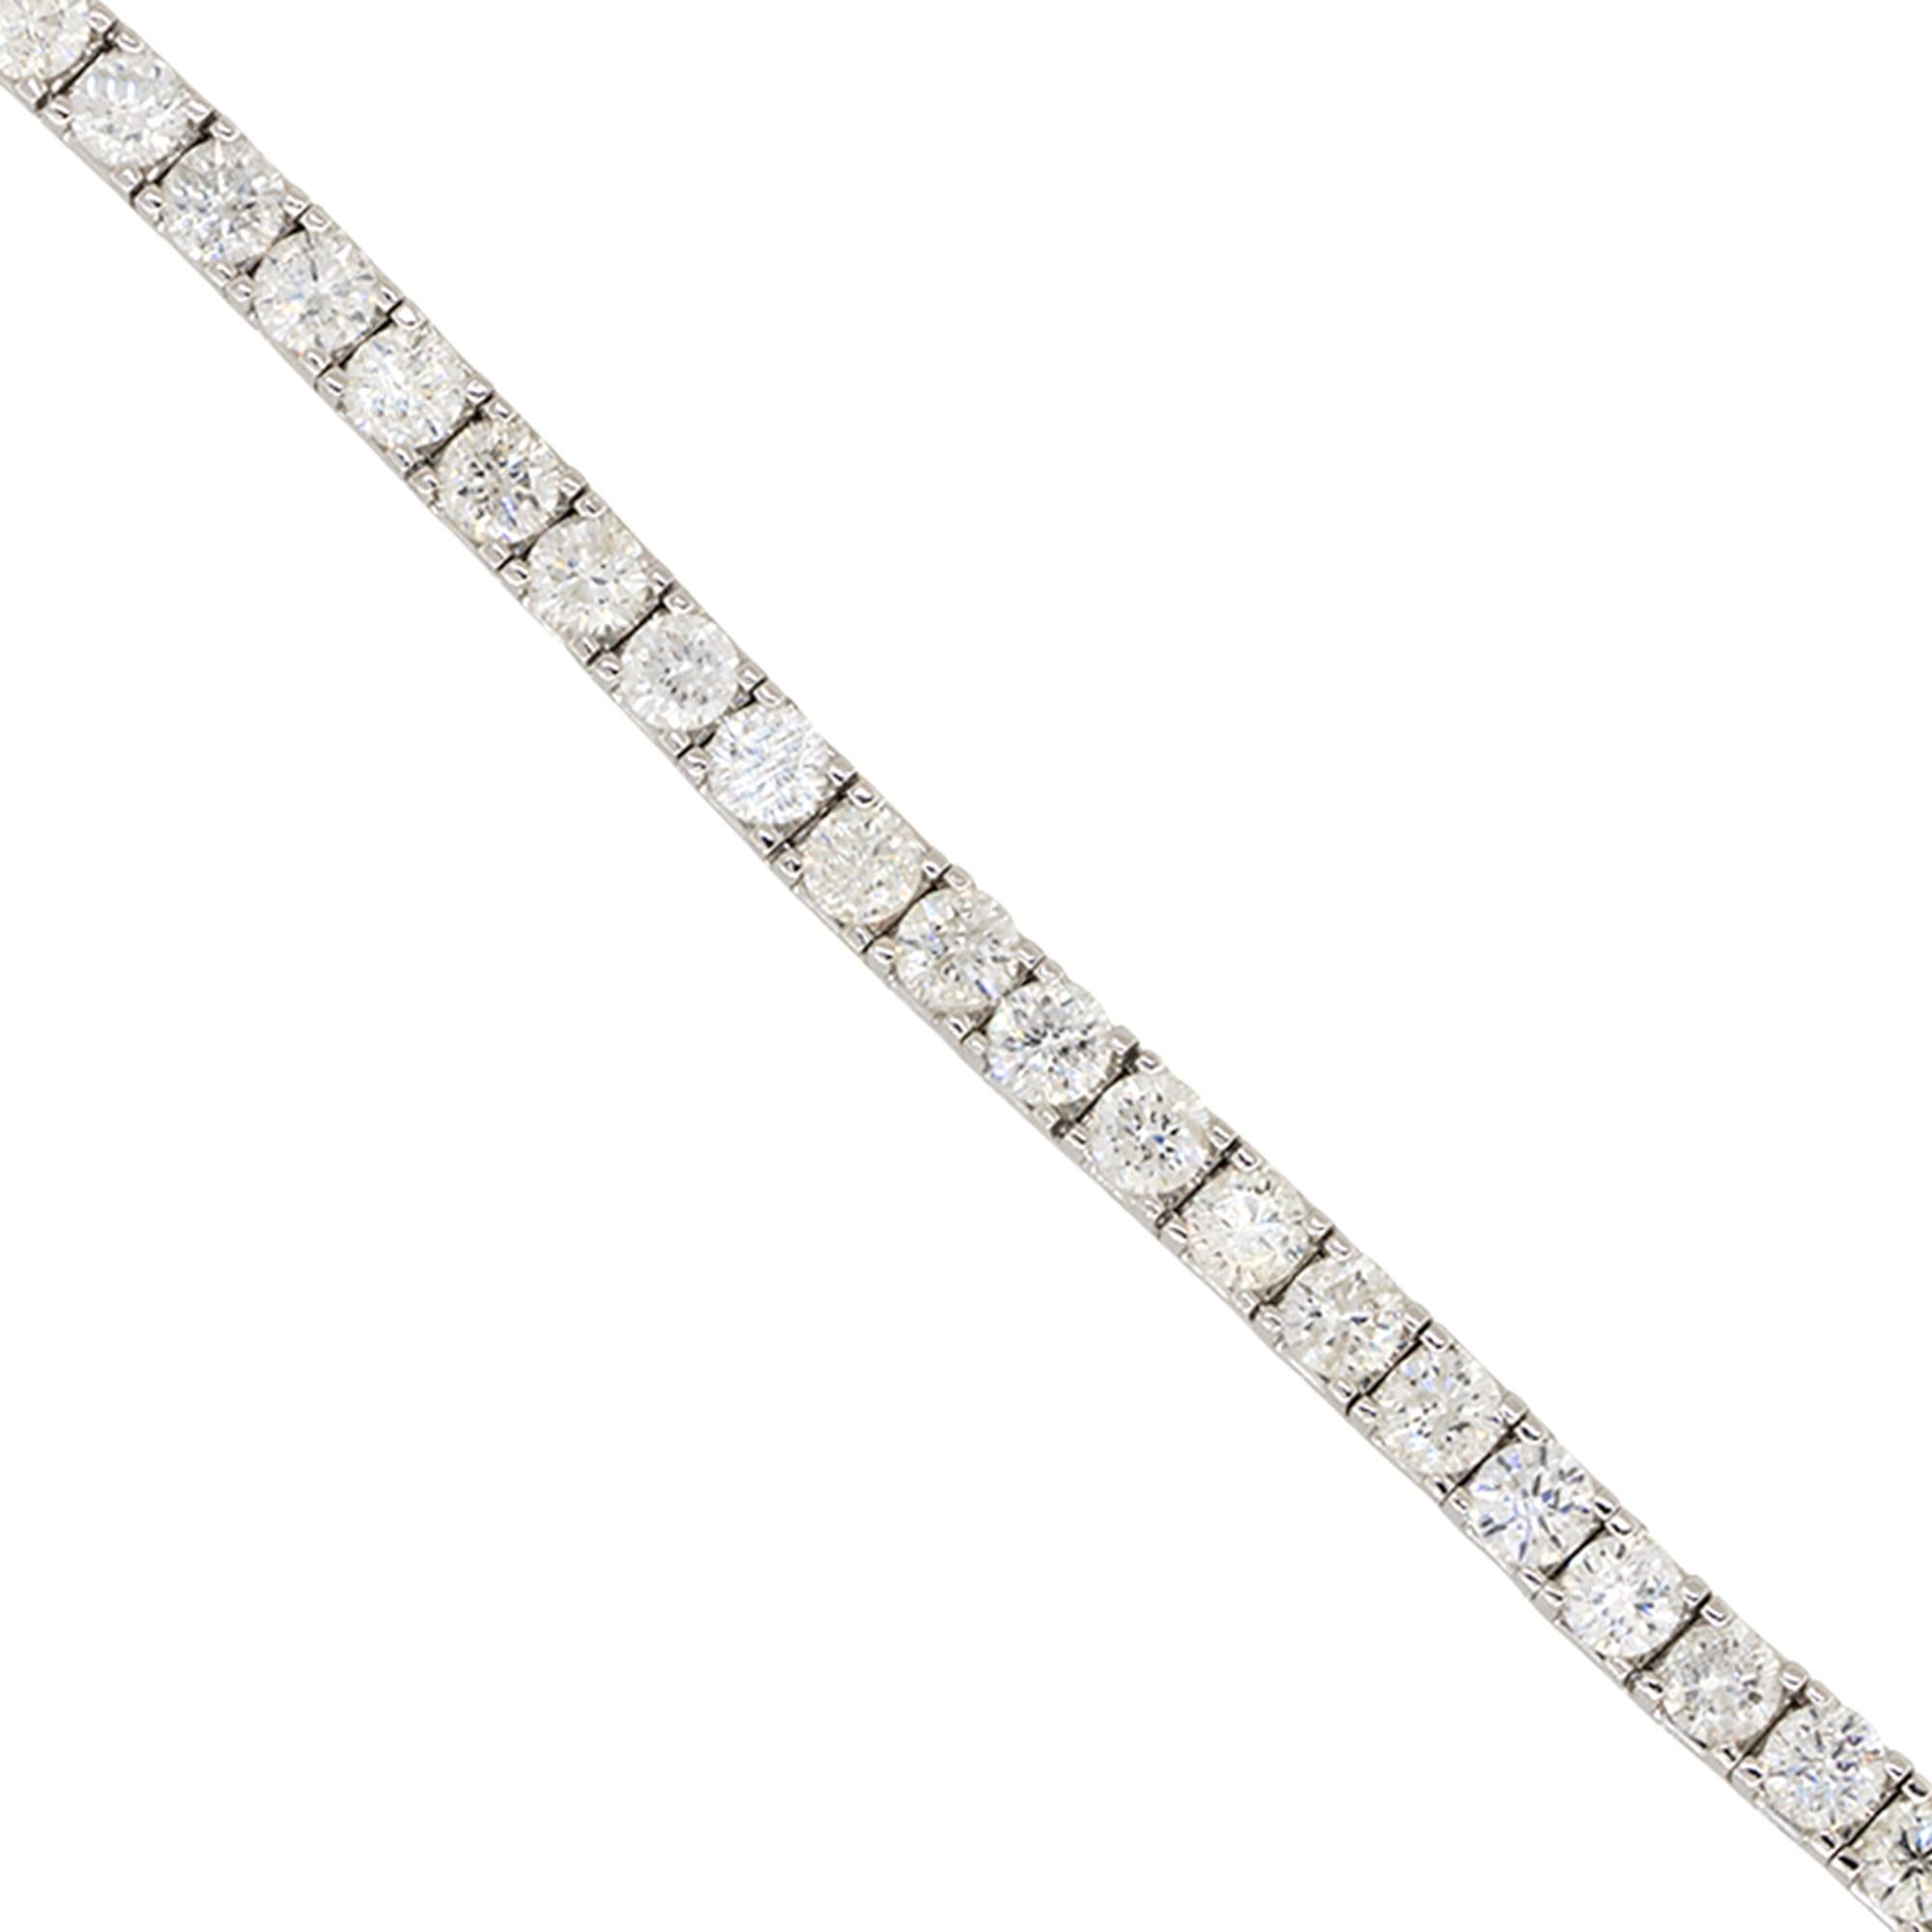 Material: 14k White Gold
Diamond Details: Approx. 10.00ctw of round cut Diamonds. Diamonds are G/H in color ands SI-I1 in clarity
Bracelet Measurements: 7 inches in length and 4 mm wide
Total Weight: 20.8g (13.3dwt)
Additional Details: This item